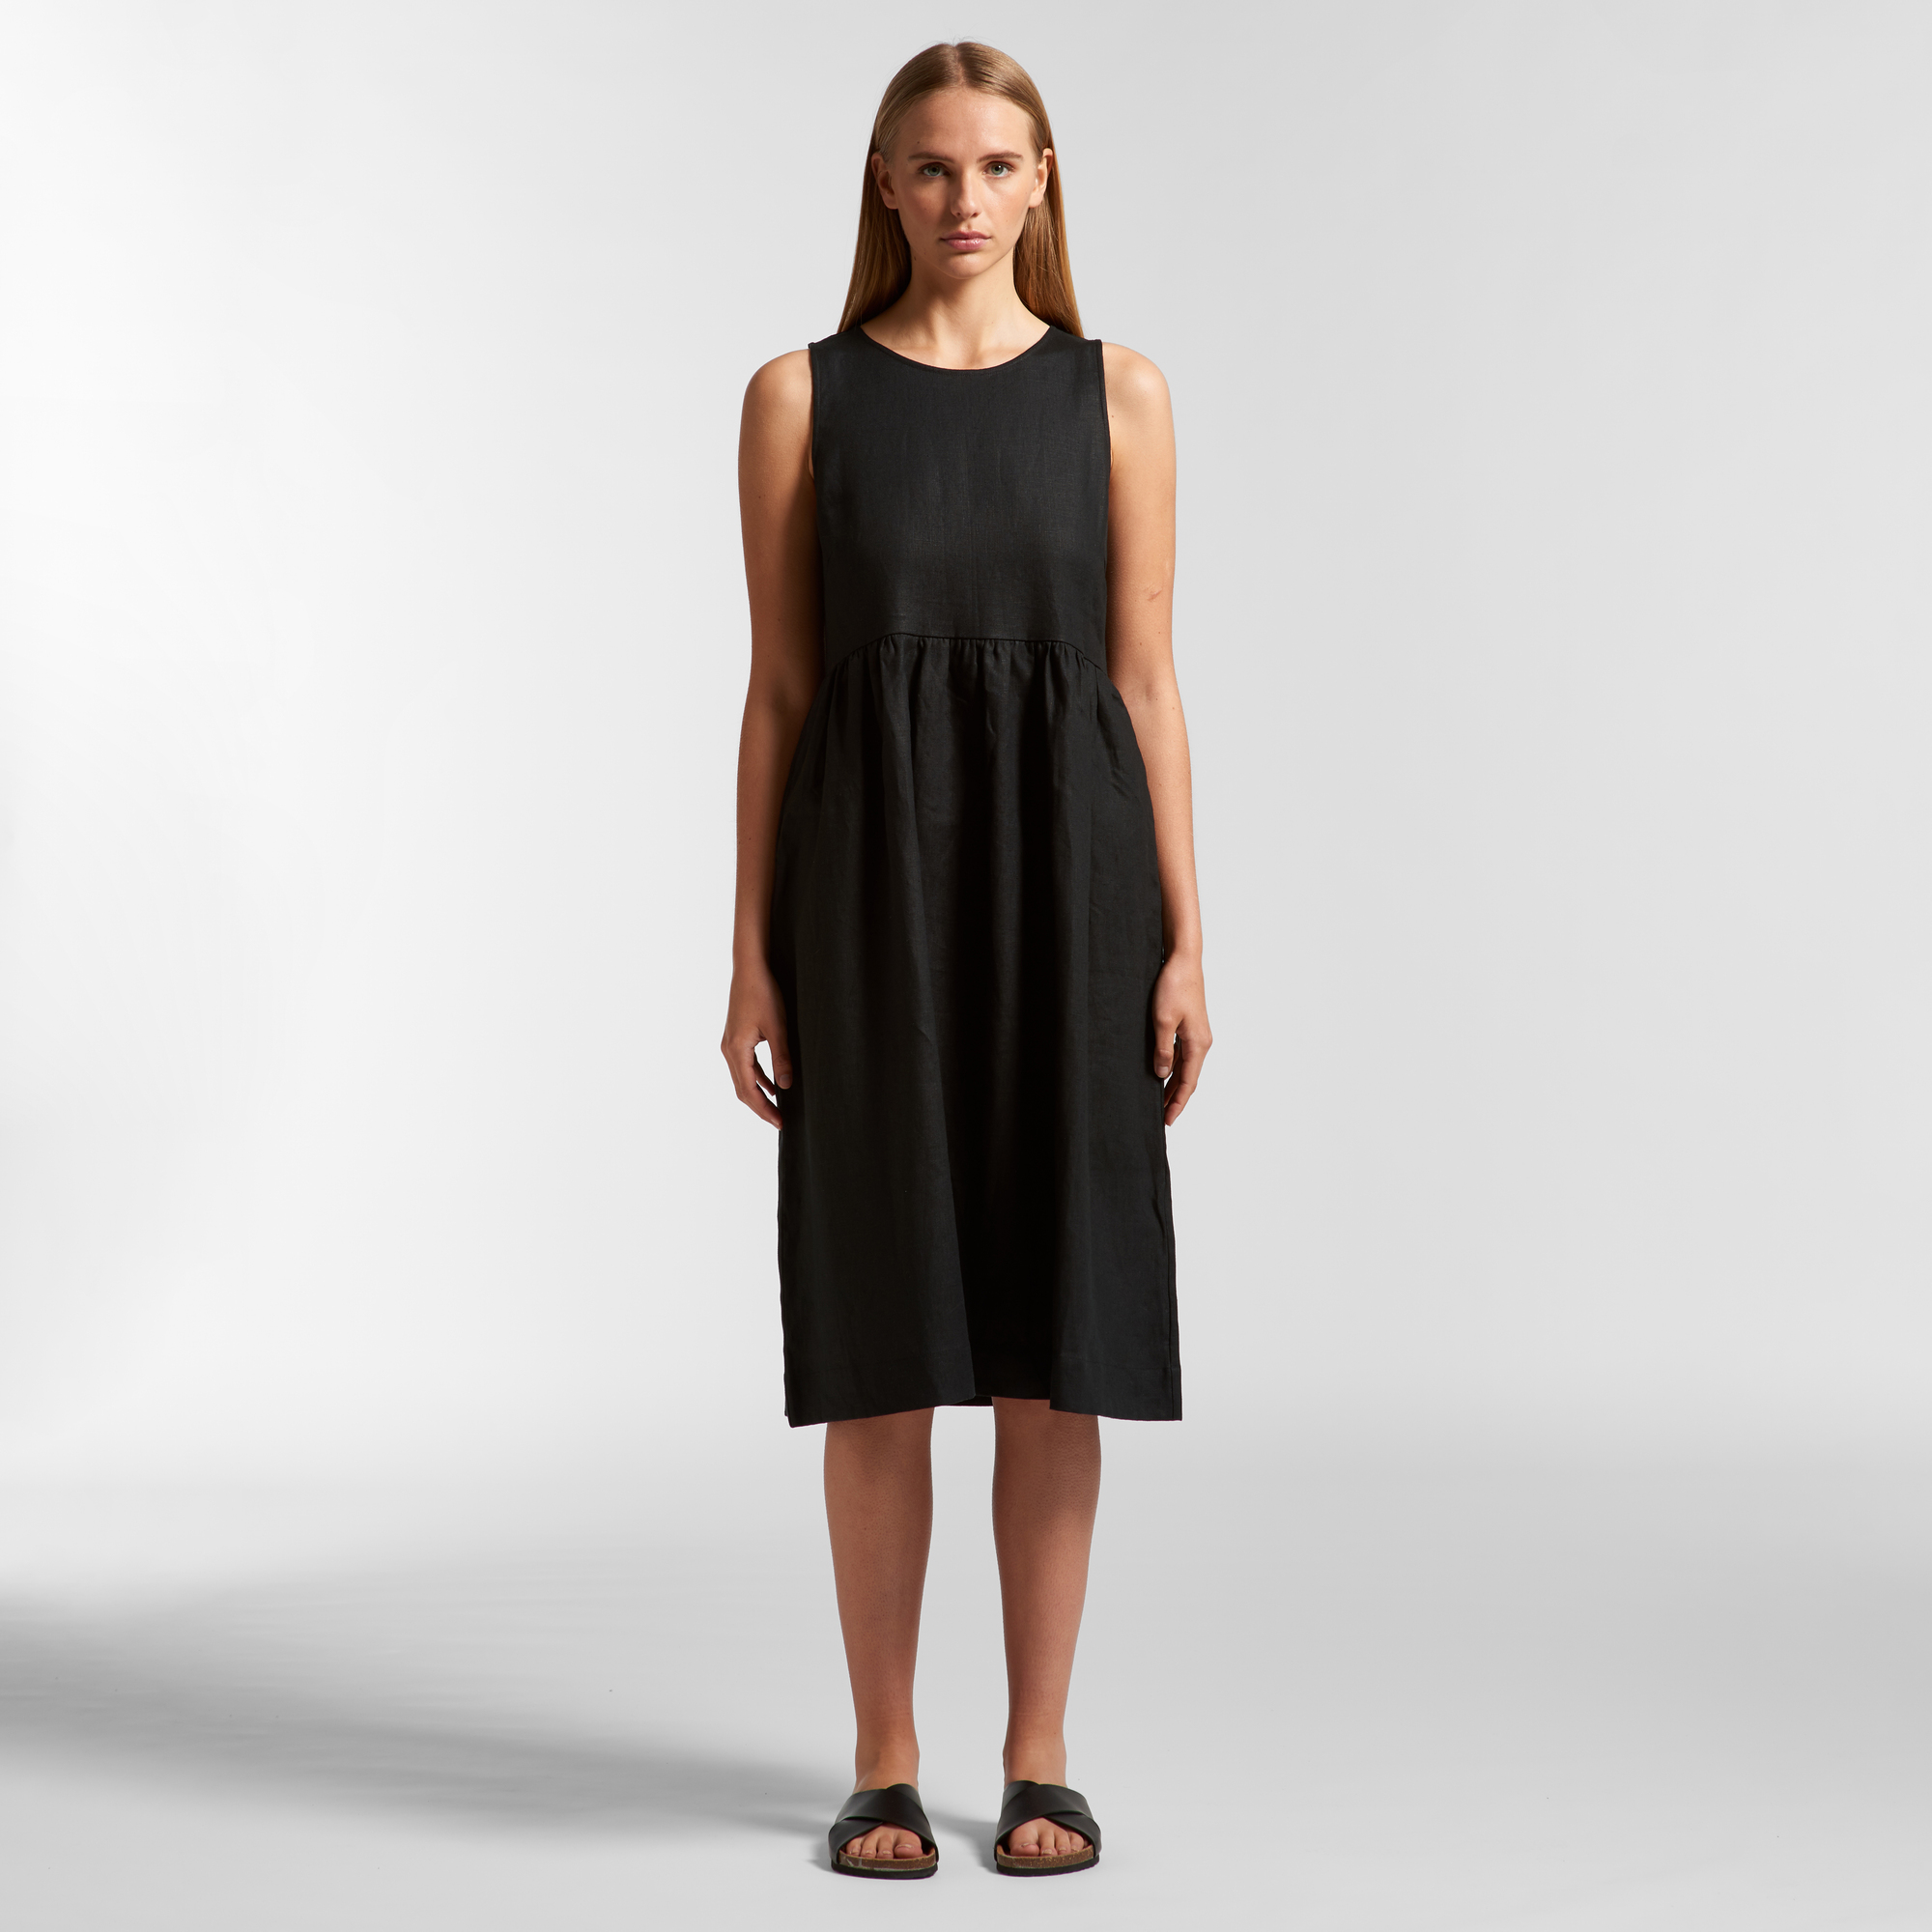 Women's Linen Dress | Branded Dress | Printed Dress NZ | AS Colour | Withers & Co